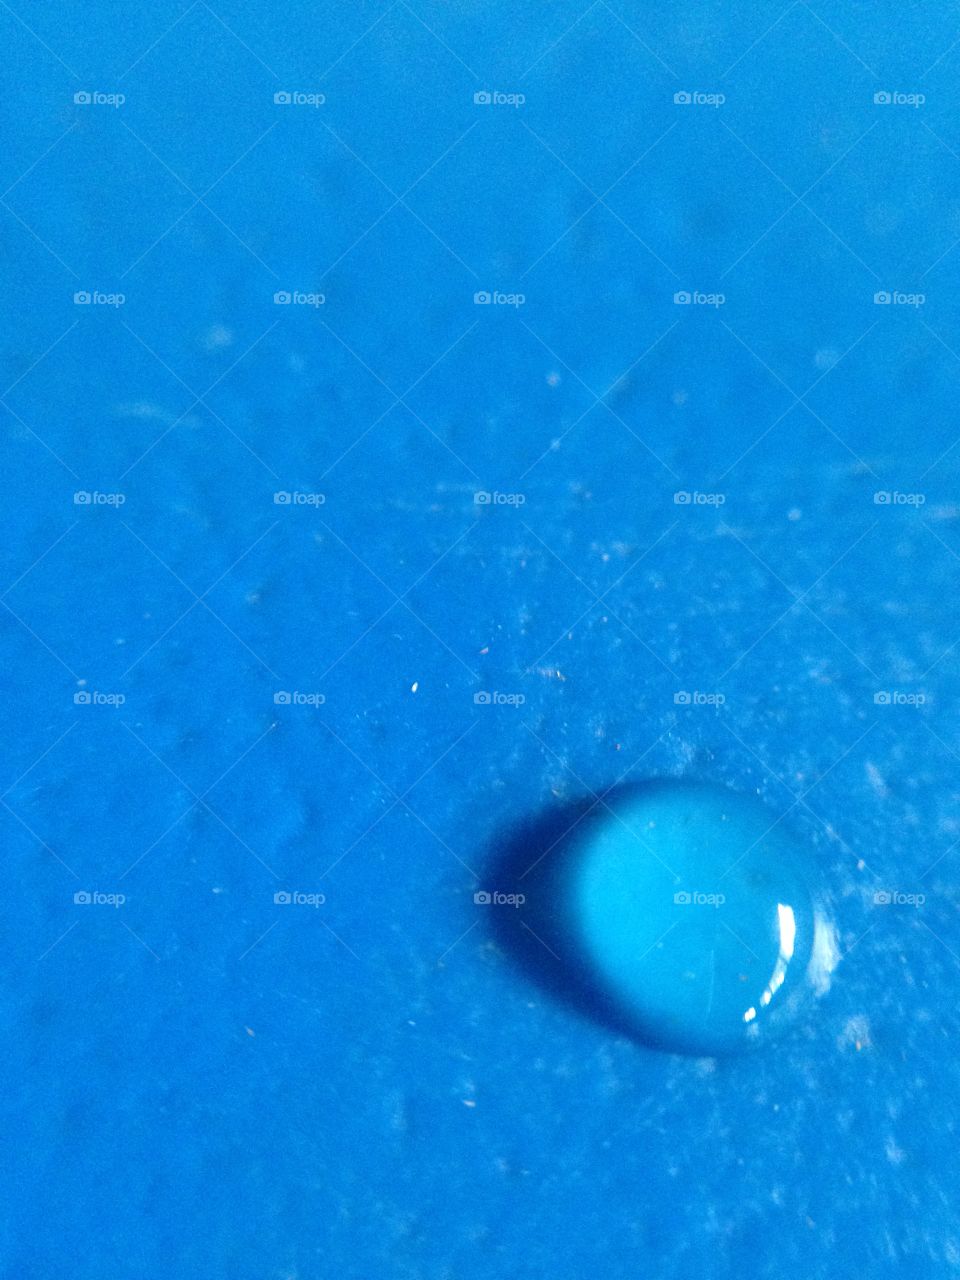 One drop of water on blue plastic